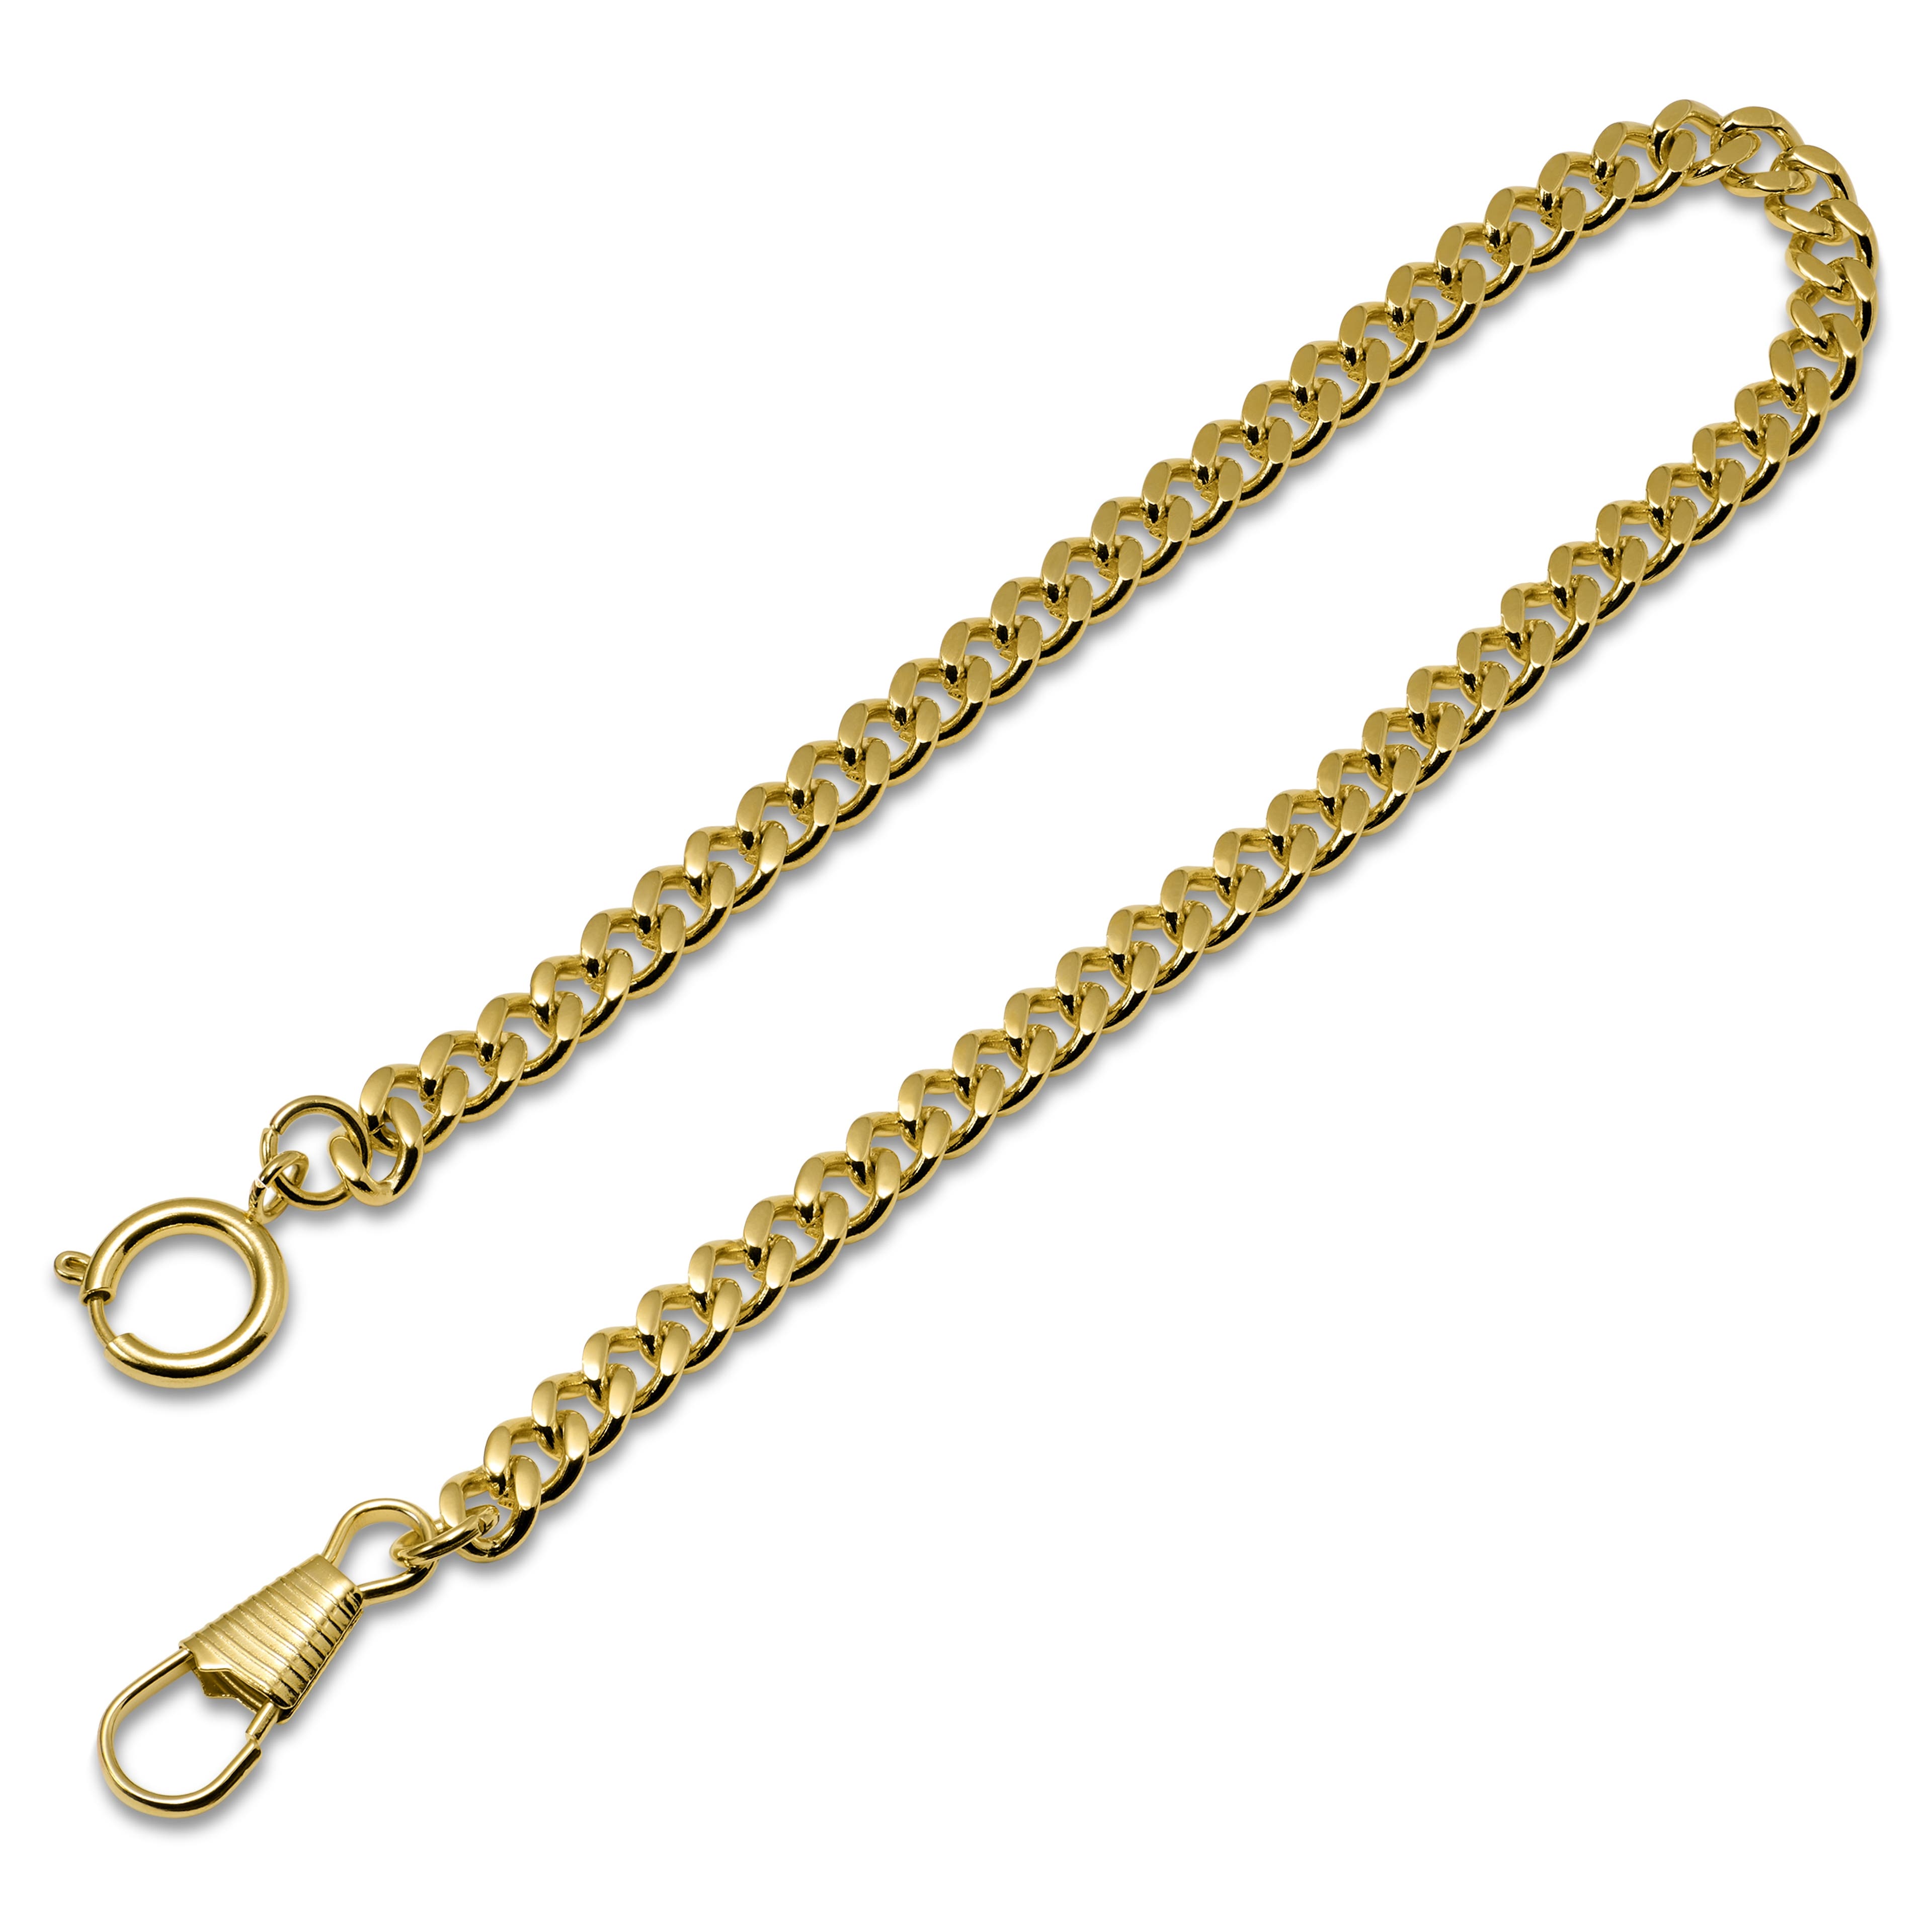 Gold-Tone Steel Bolt Ring Pocket Watch Chain